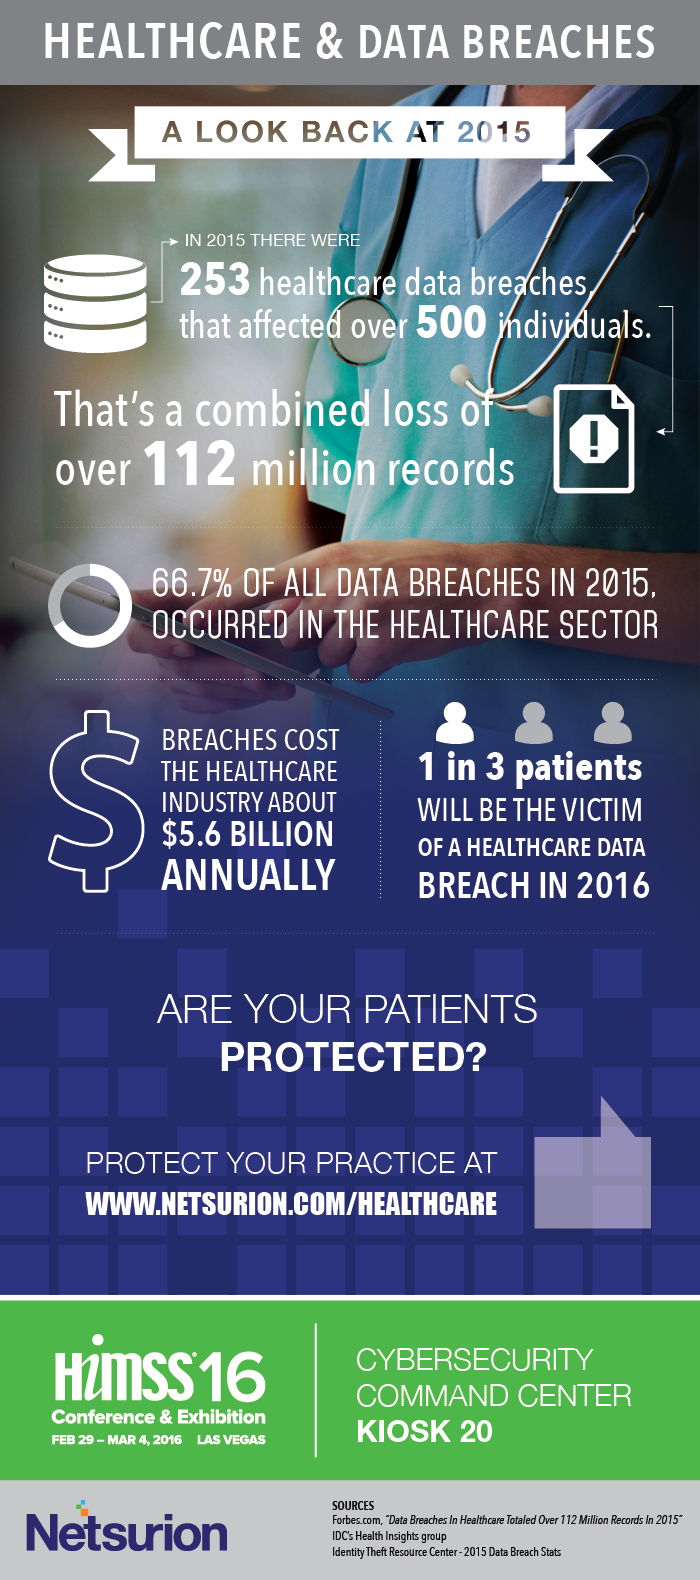 2015: “The Year of the Healthcare Hack"